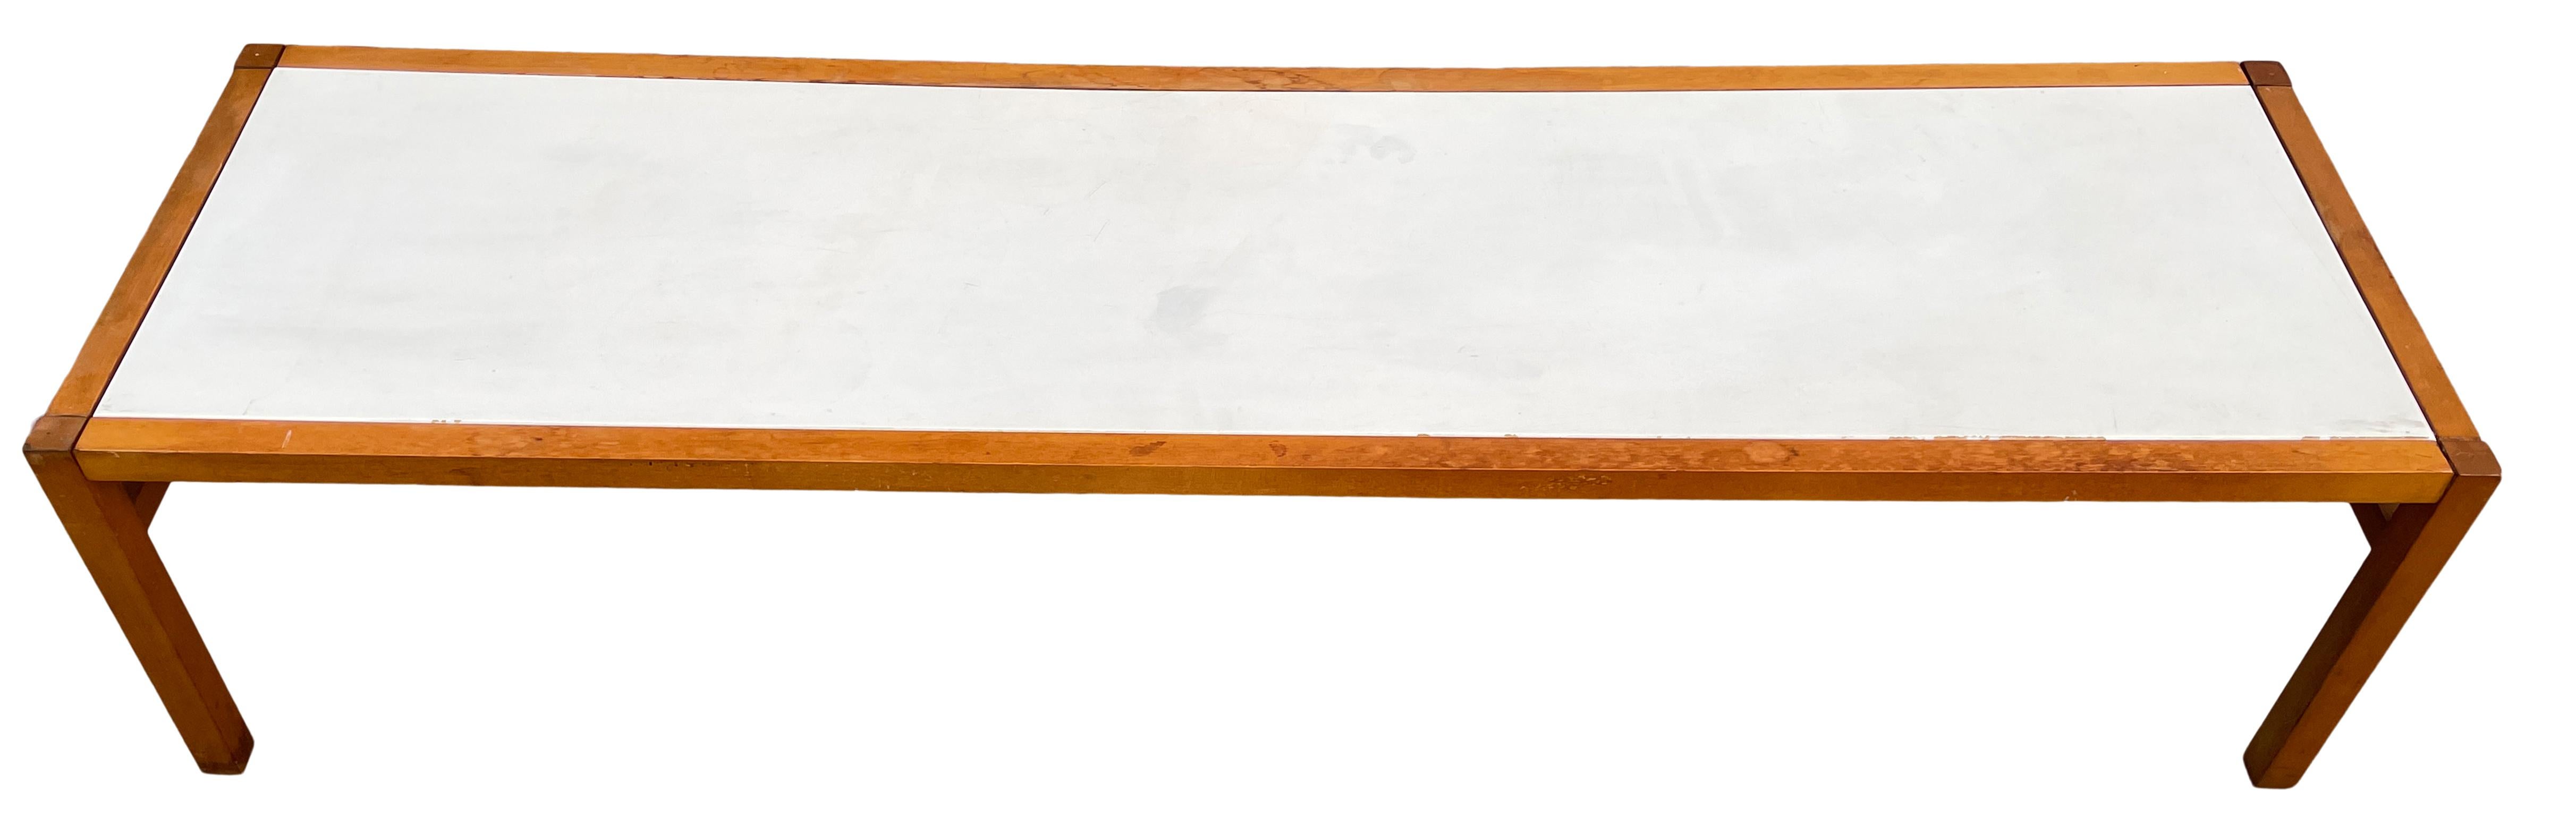 Mid Century Modern coffee table with white top Style of Paul Mccobb. Two Matching coffee tables available - Listed as Individual items. Solid wood frame and white Lacquer insert. No Labels or Marks.